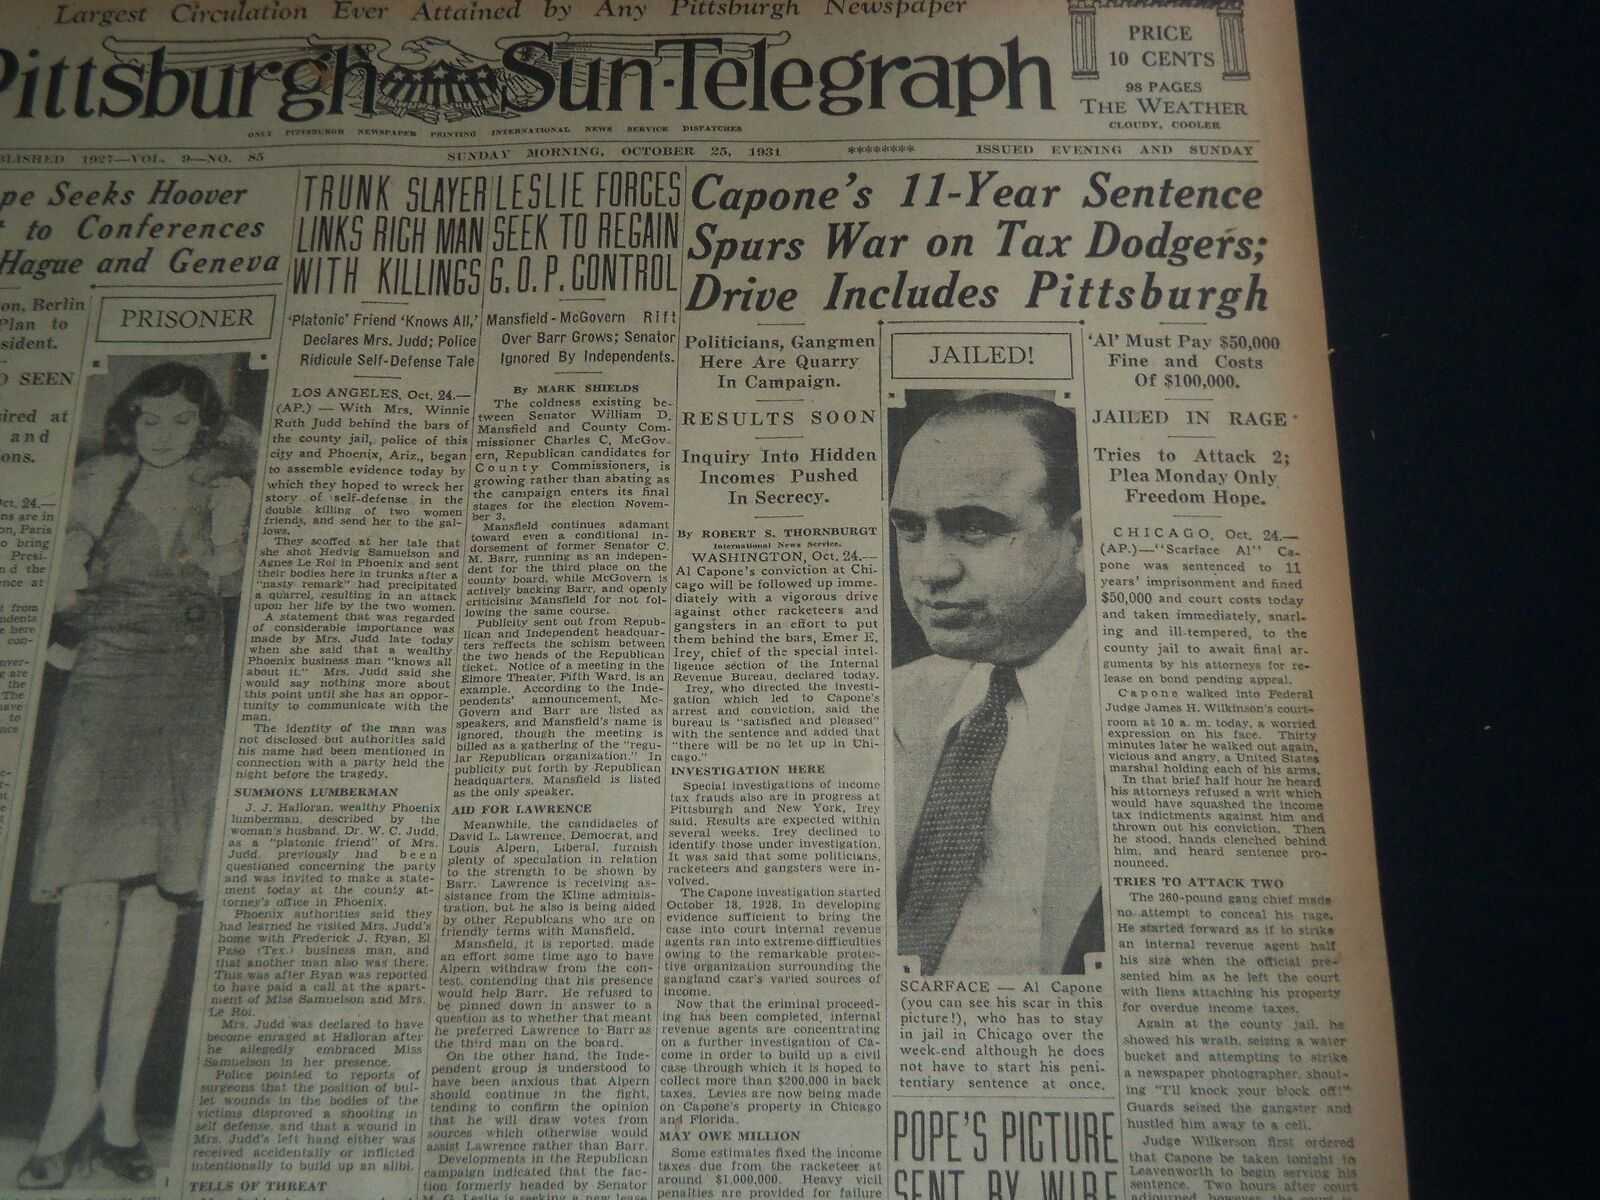 1931 OCTOBER 25 PITTSBURGH SUN-TELEGRAPH - CAPONE'S 11 YEAR SENTENCE - NT 7533